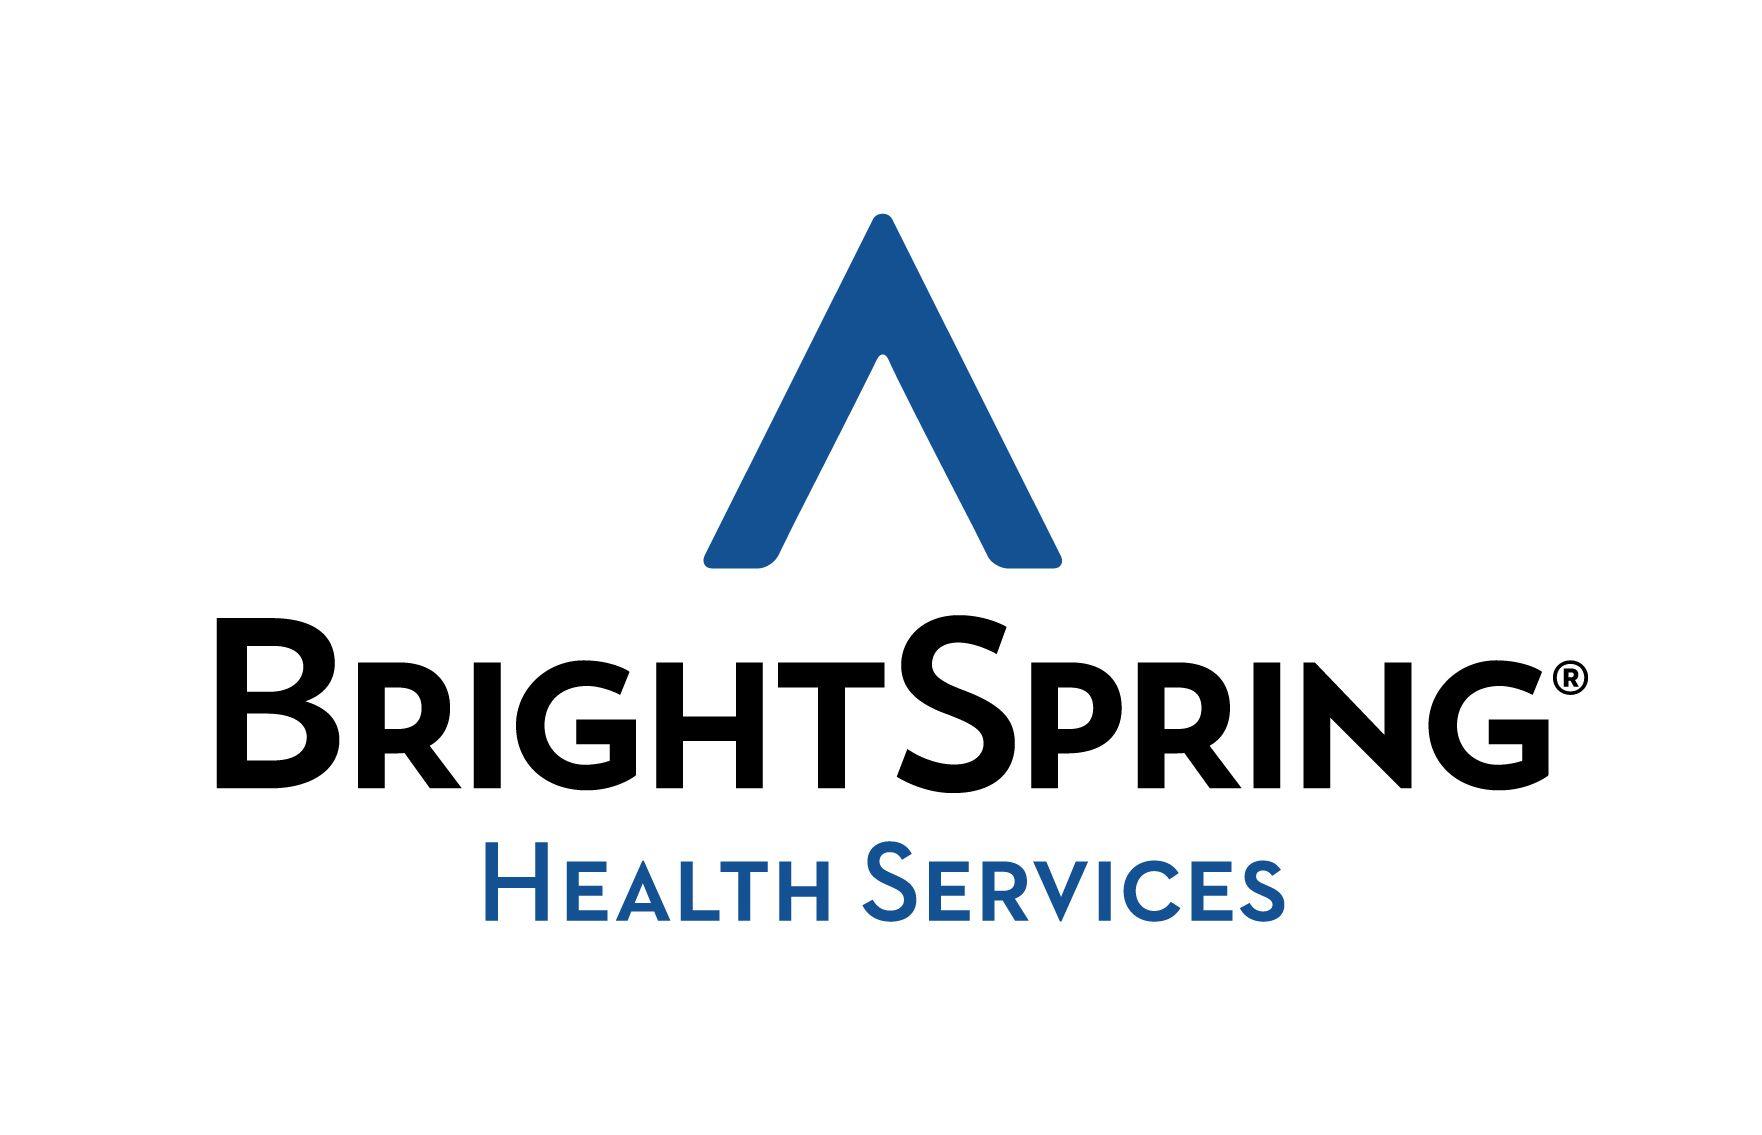 Baker Triangle Logo - BrightSpring and PharMerica Combine to Form Comprehensive Health ...